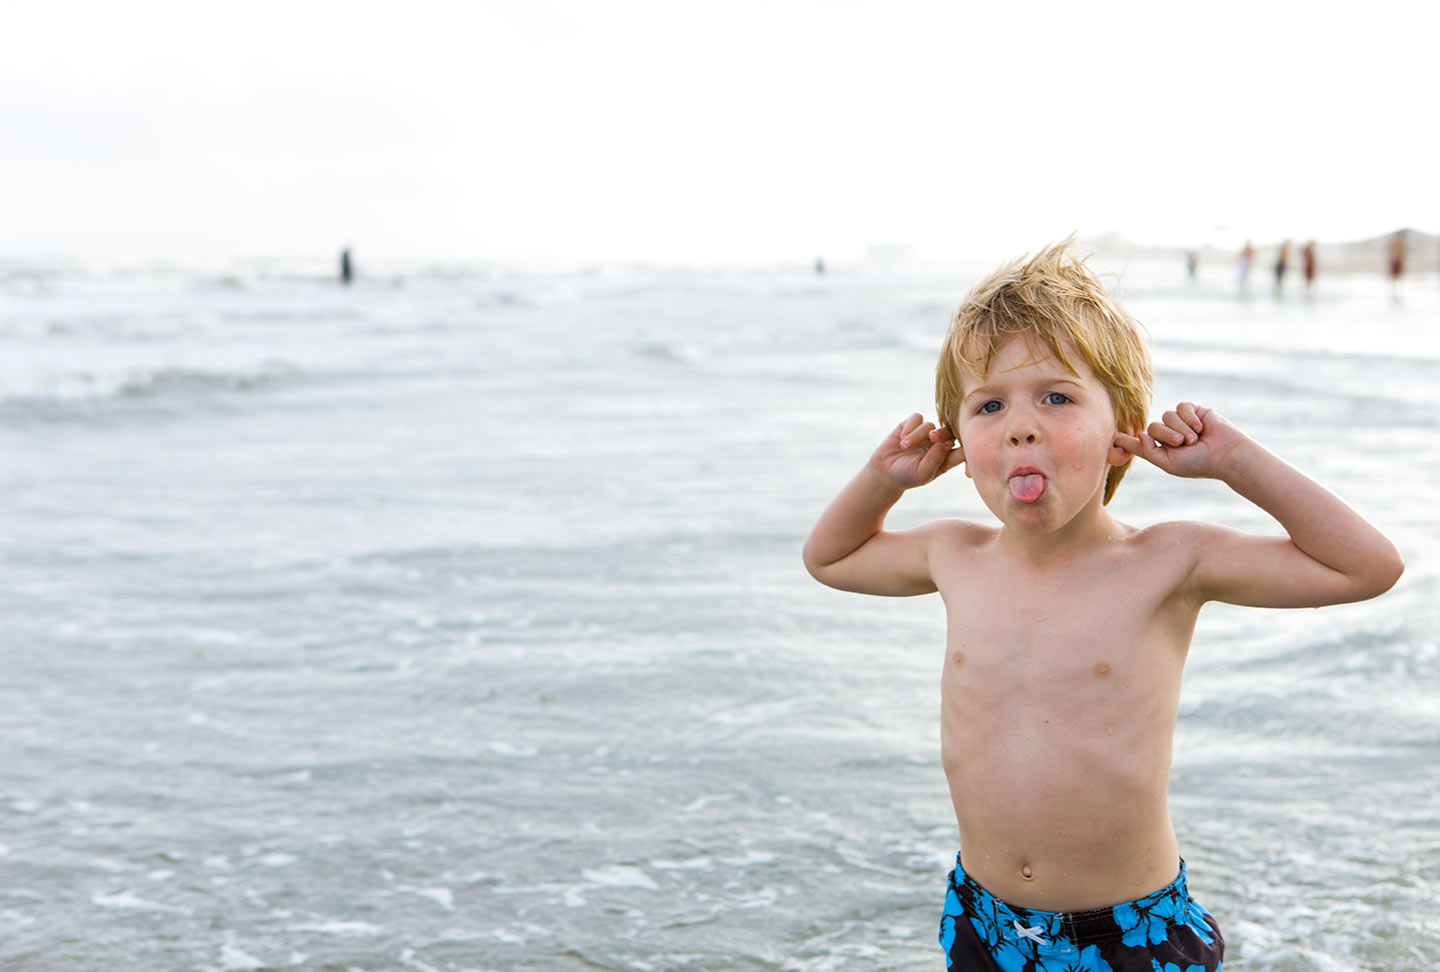 Little Boy at Beach in Swimsuit Making Silly Face